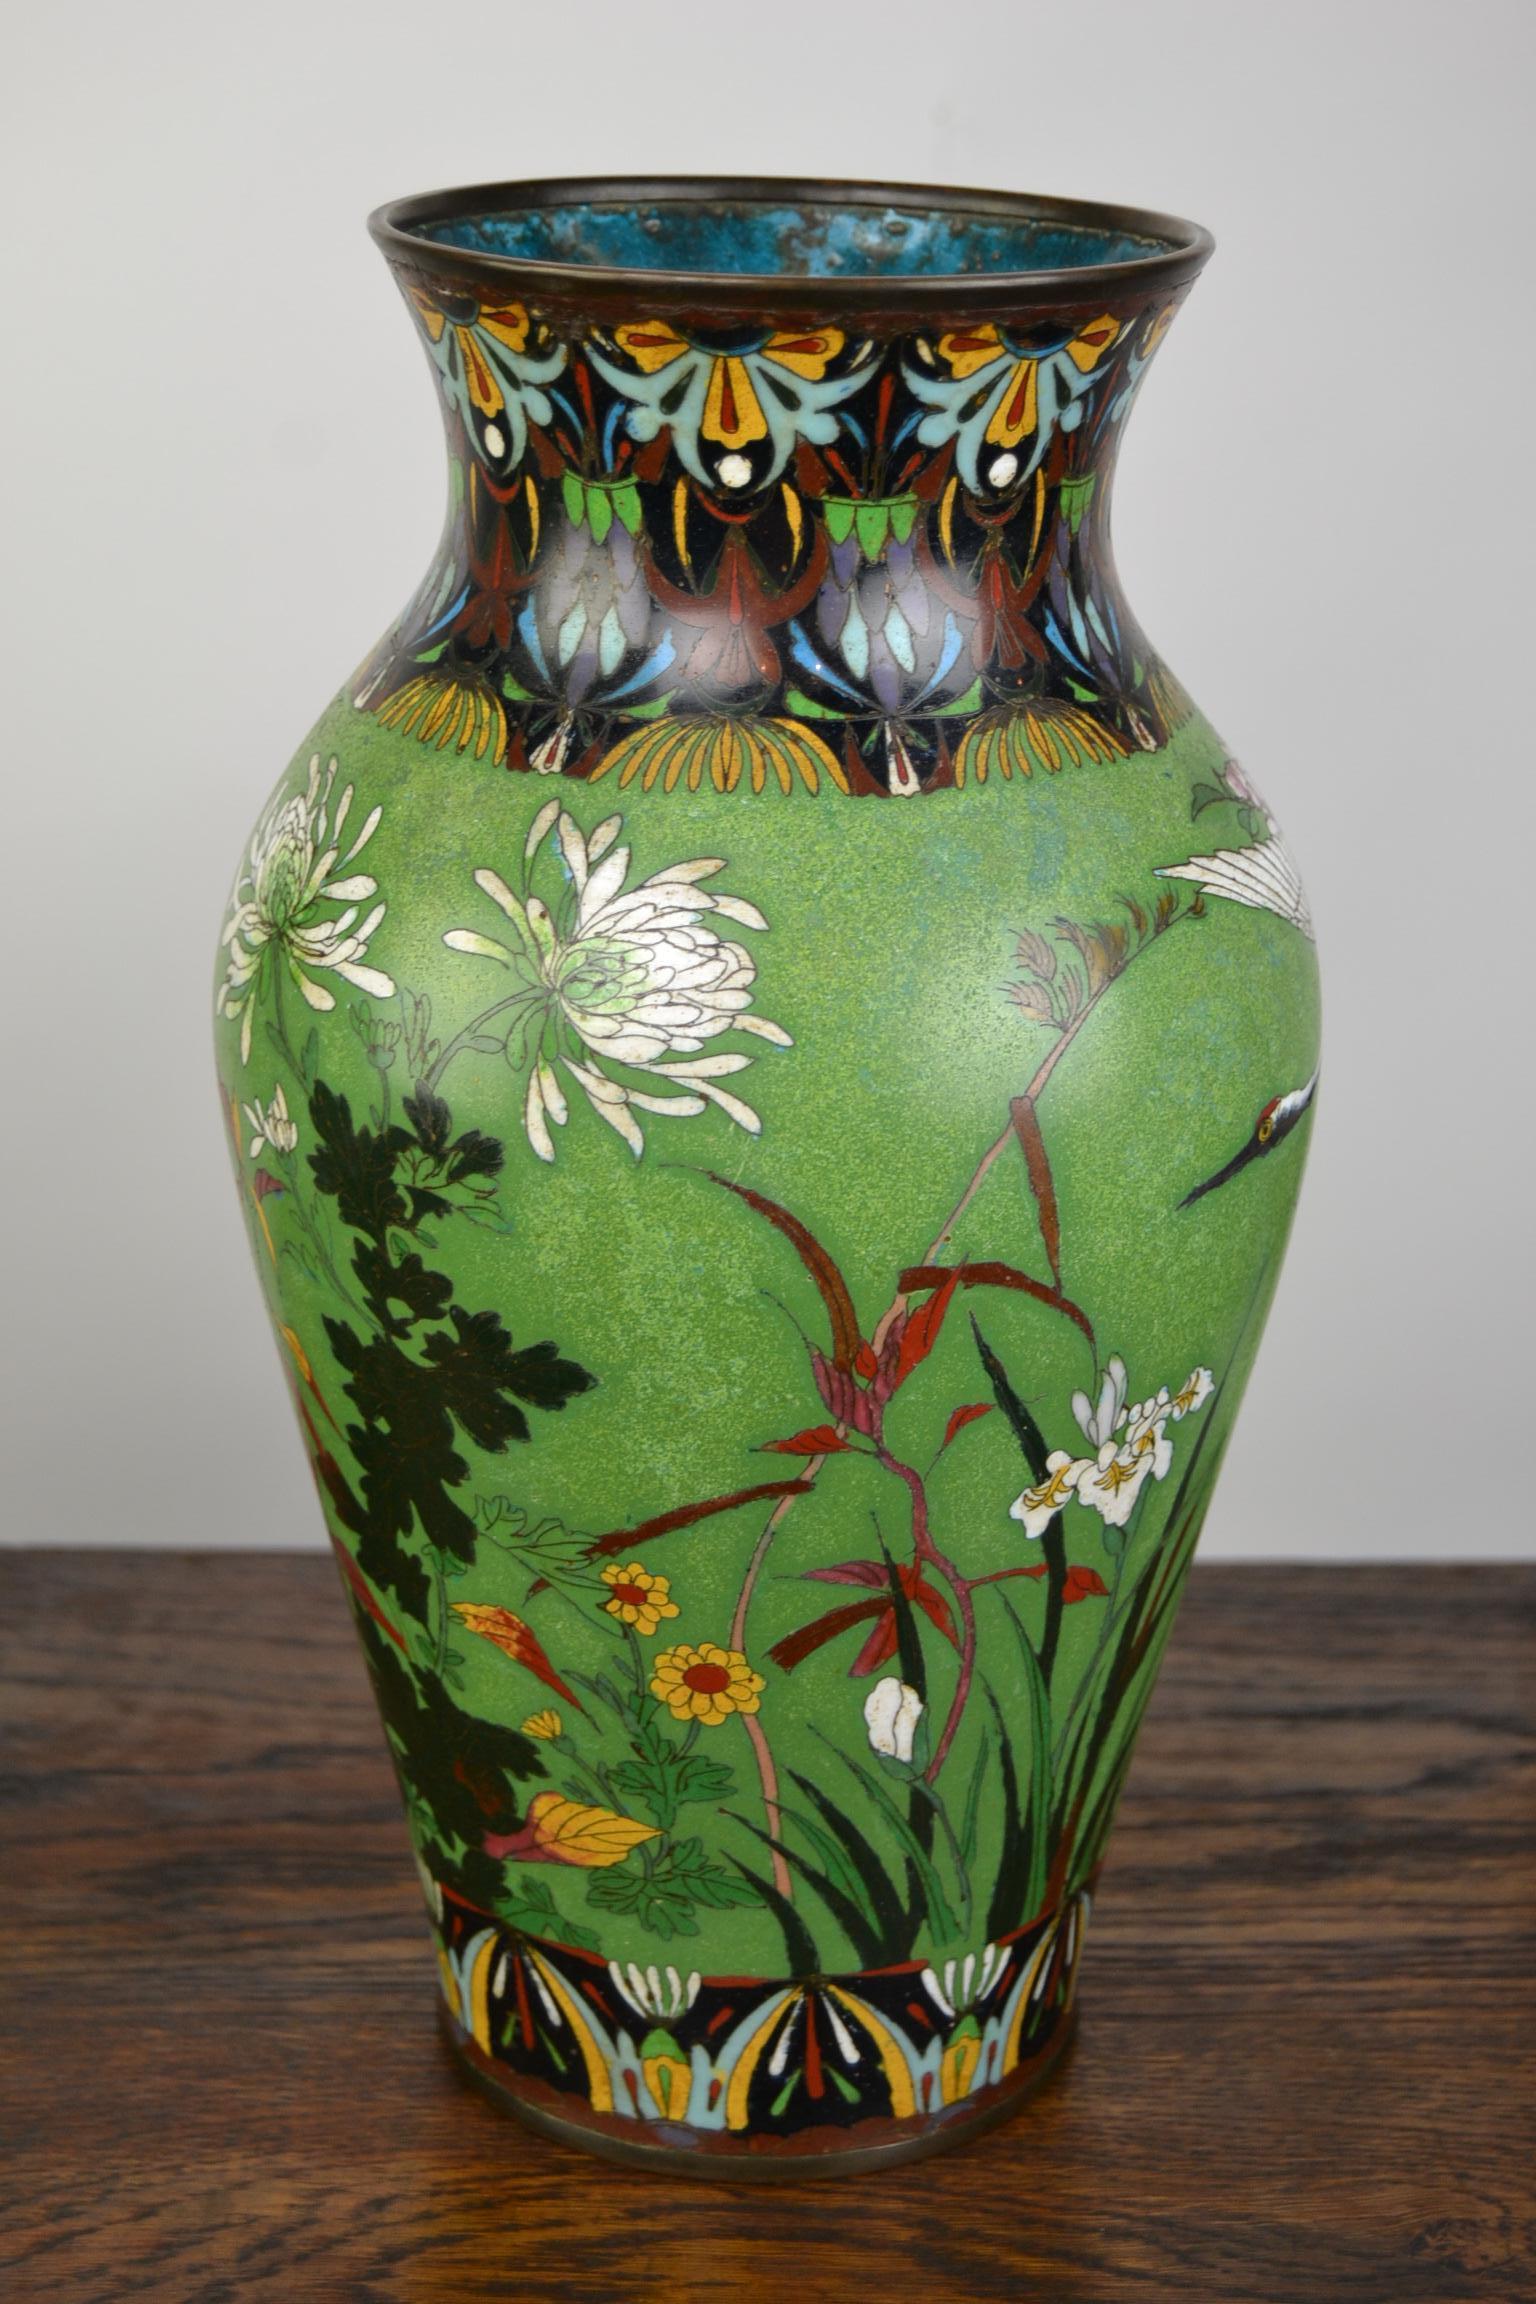 Pair of Japanese Cloisonne Enamel on Copper Vases with Crane Birds and Flowers  2